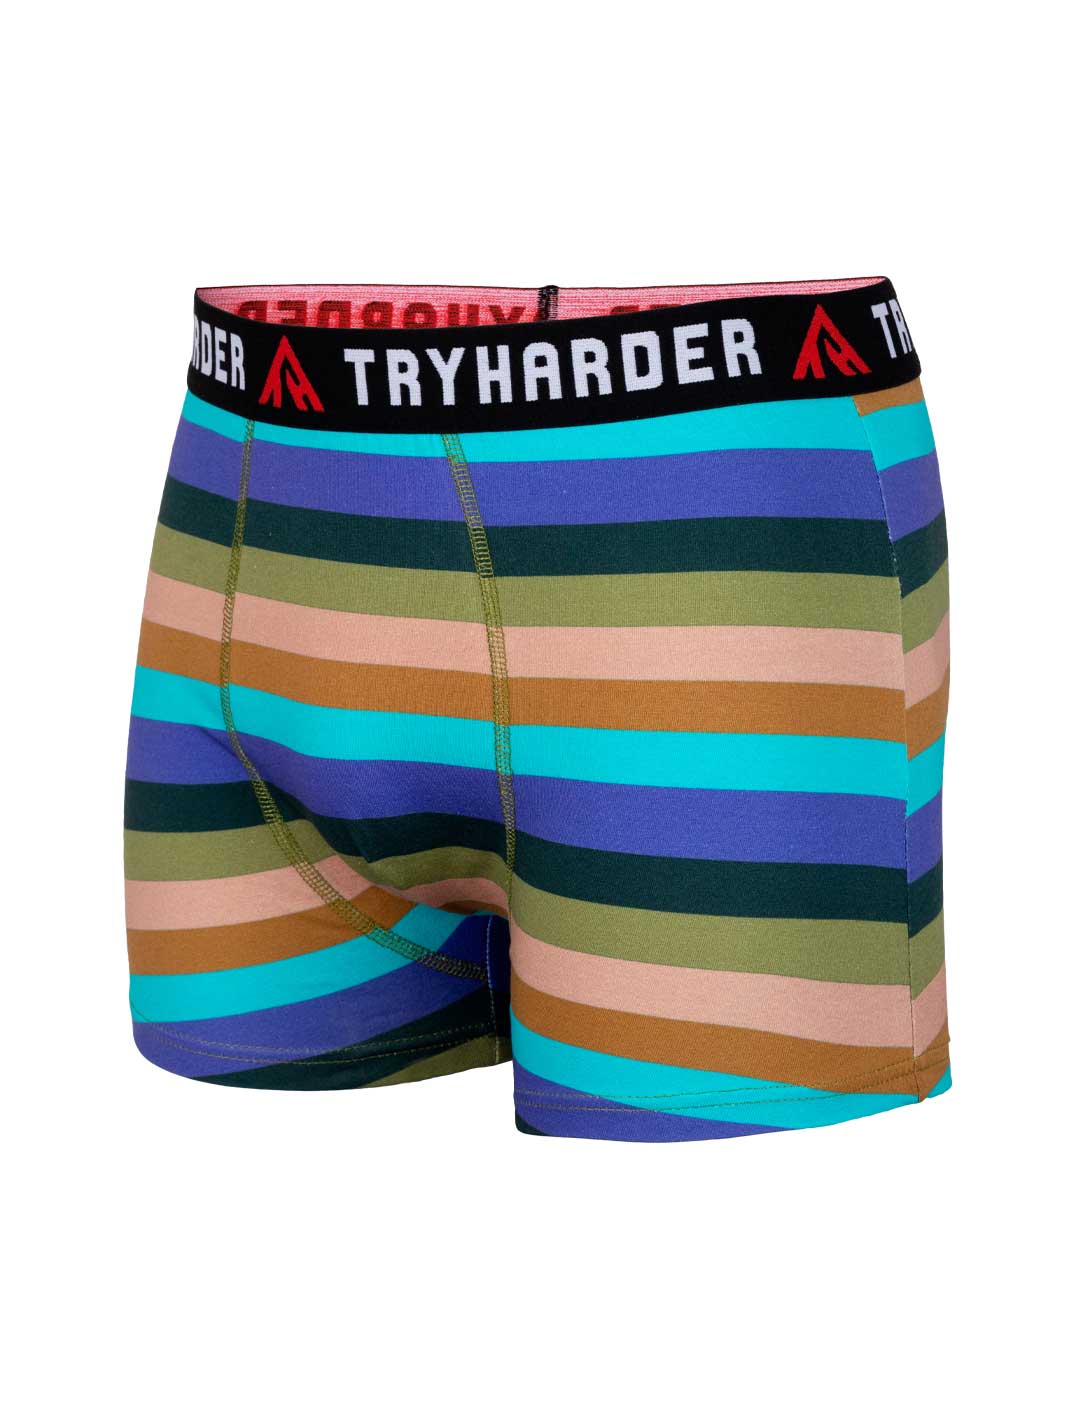 TRYHARDER - Boxer - Blue Stripes 1 pack